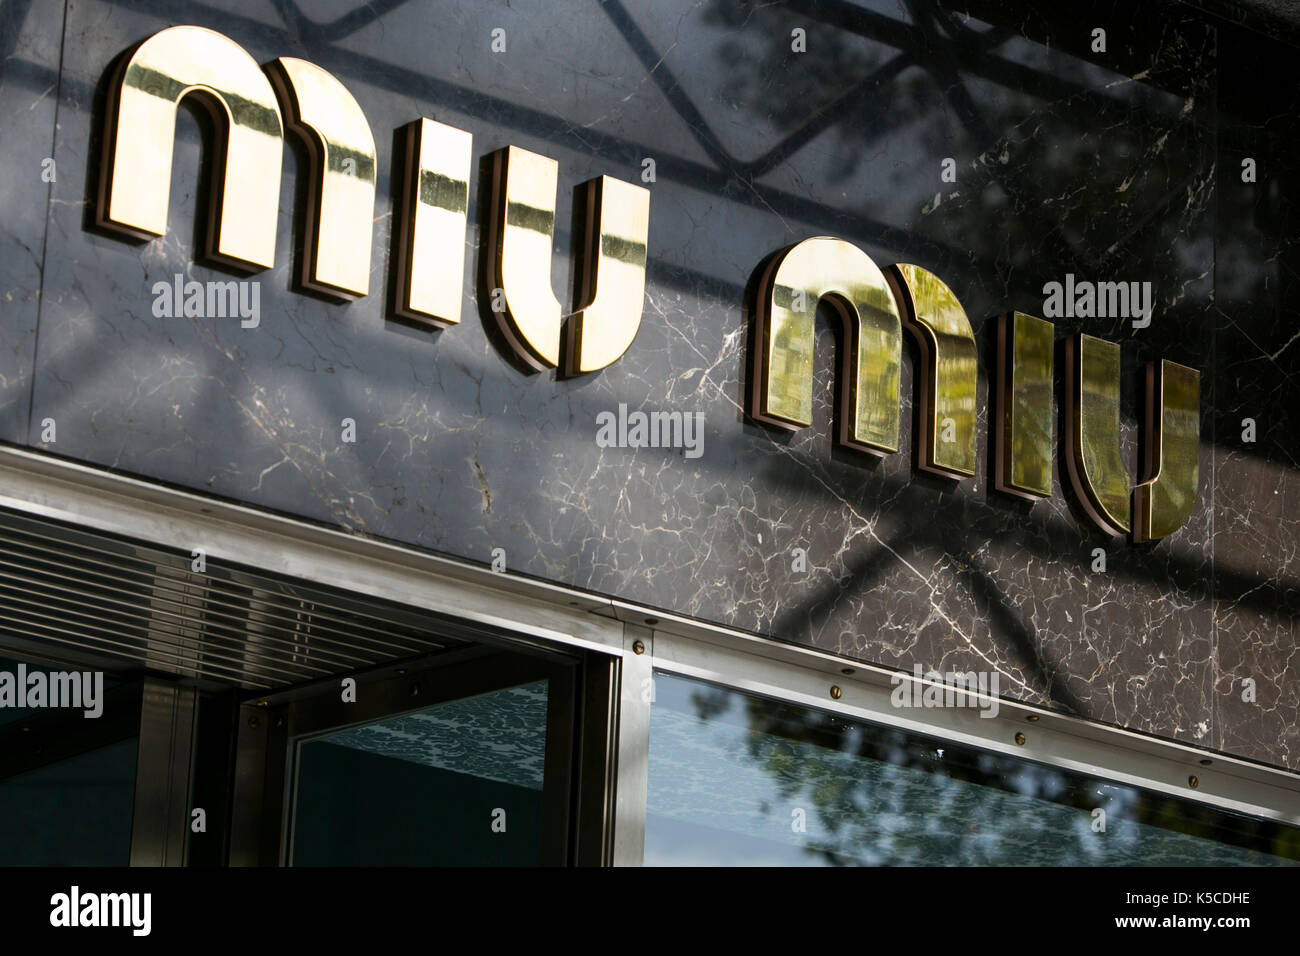 A logo sign outside of a Miu Miu clothing retail store in Barcelona, Spain on August 30, 2017. Stock Photo